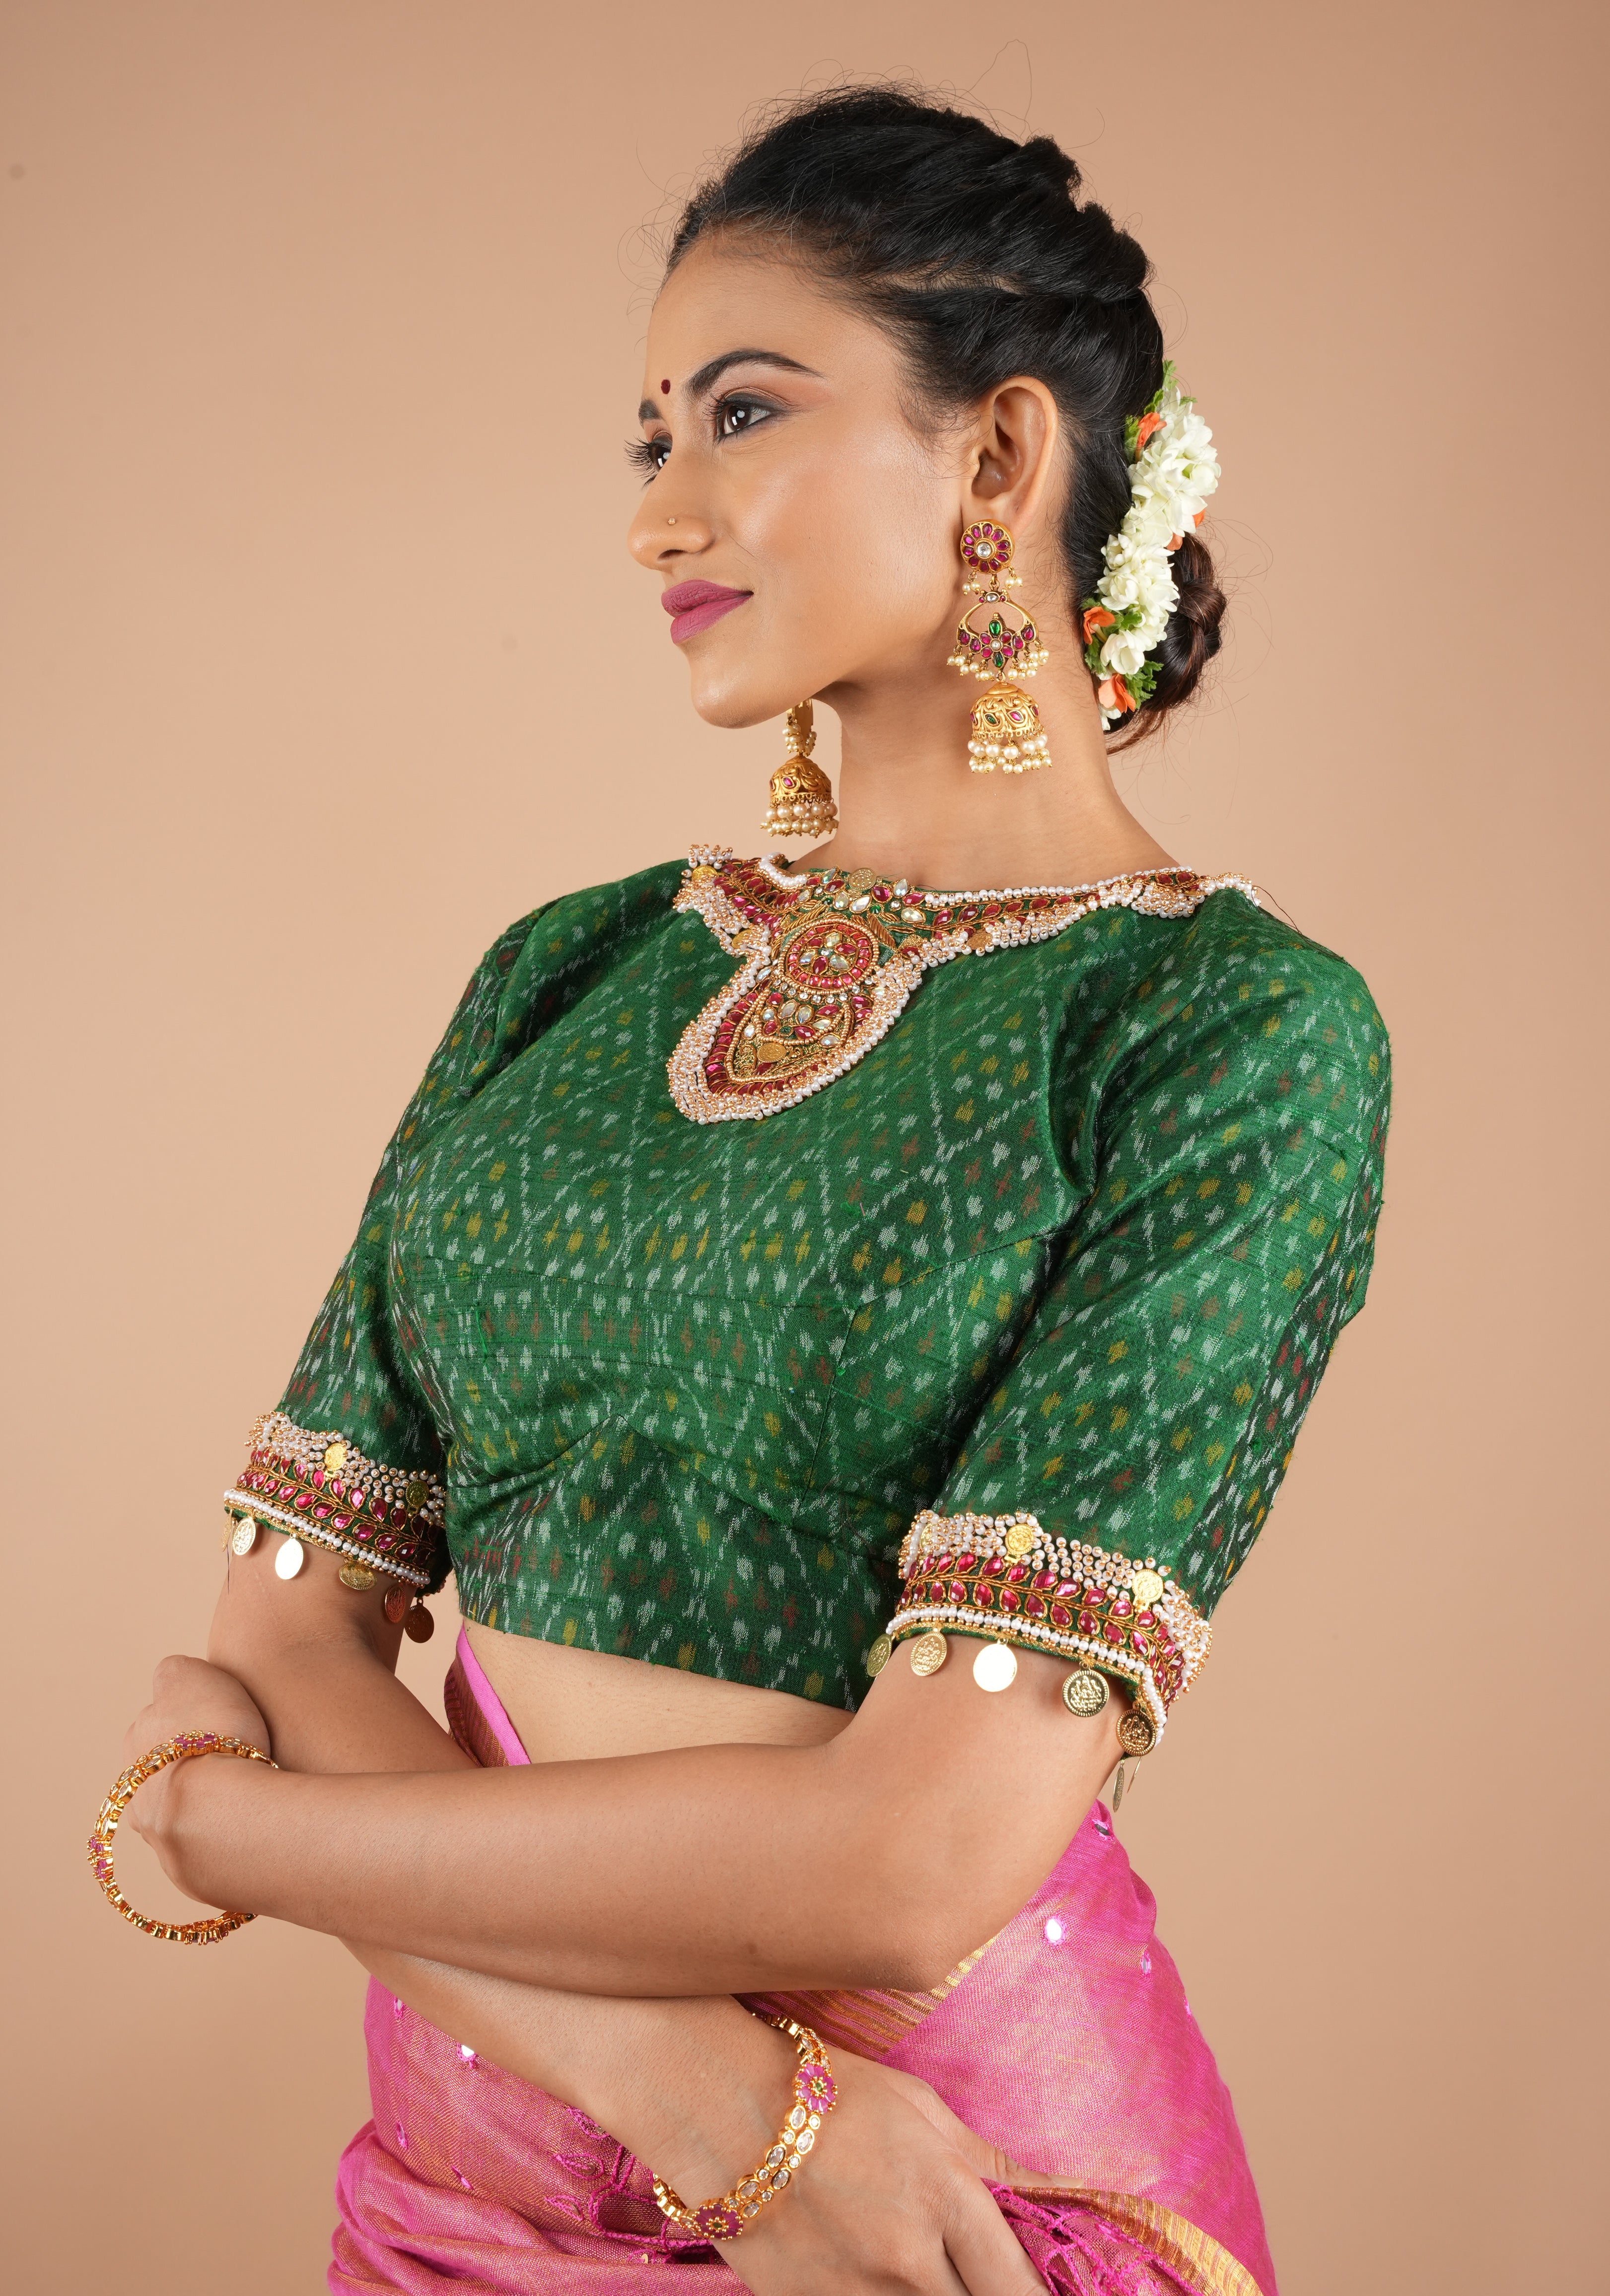 Green Ikkat Pure Raw Silk Blouse with Kemp and Moti Necklace and Bajuband design Handwork, Made to Order, Customizable